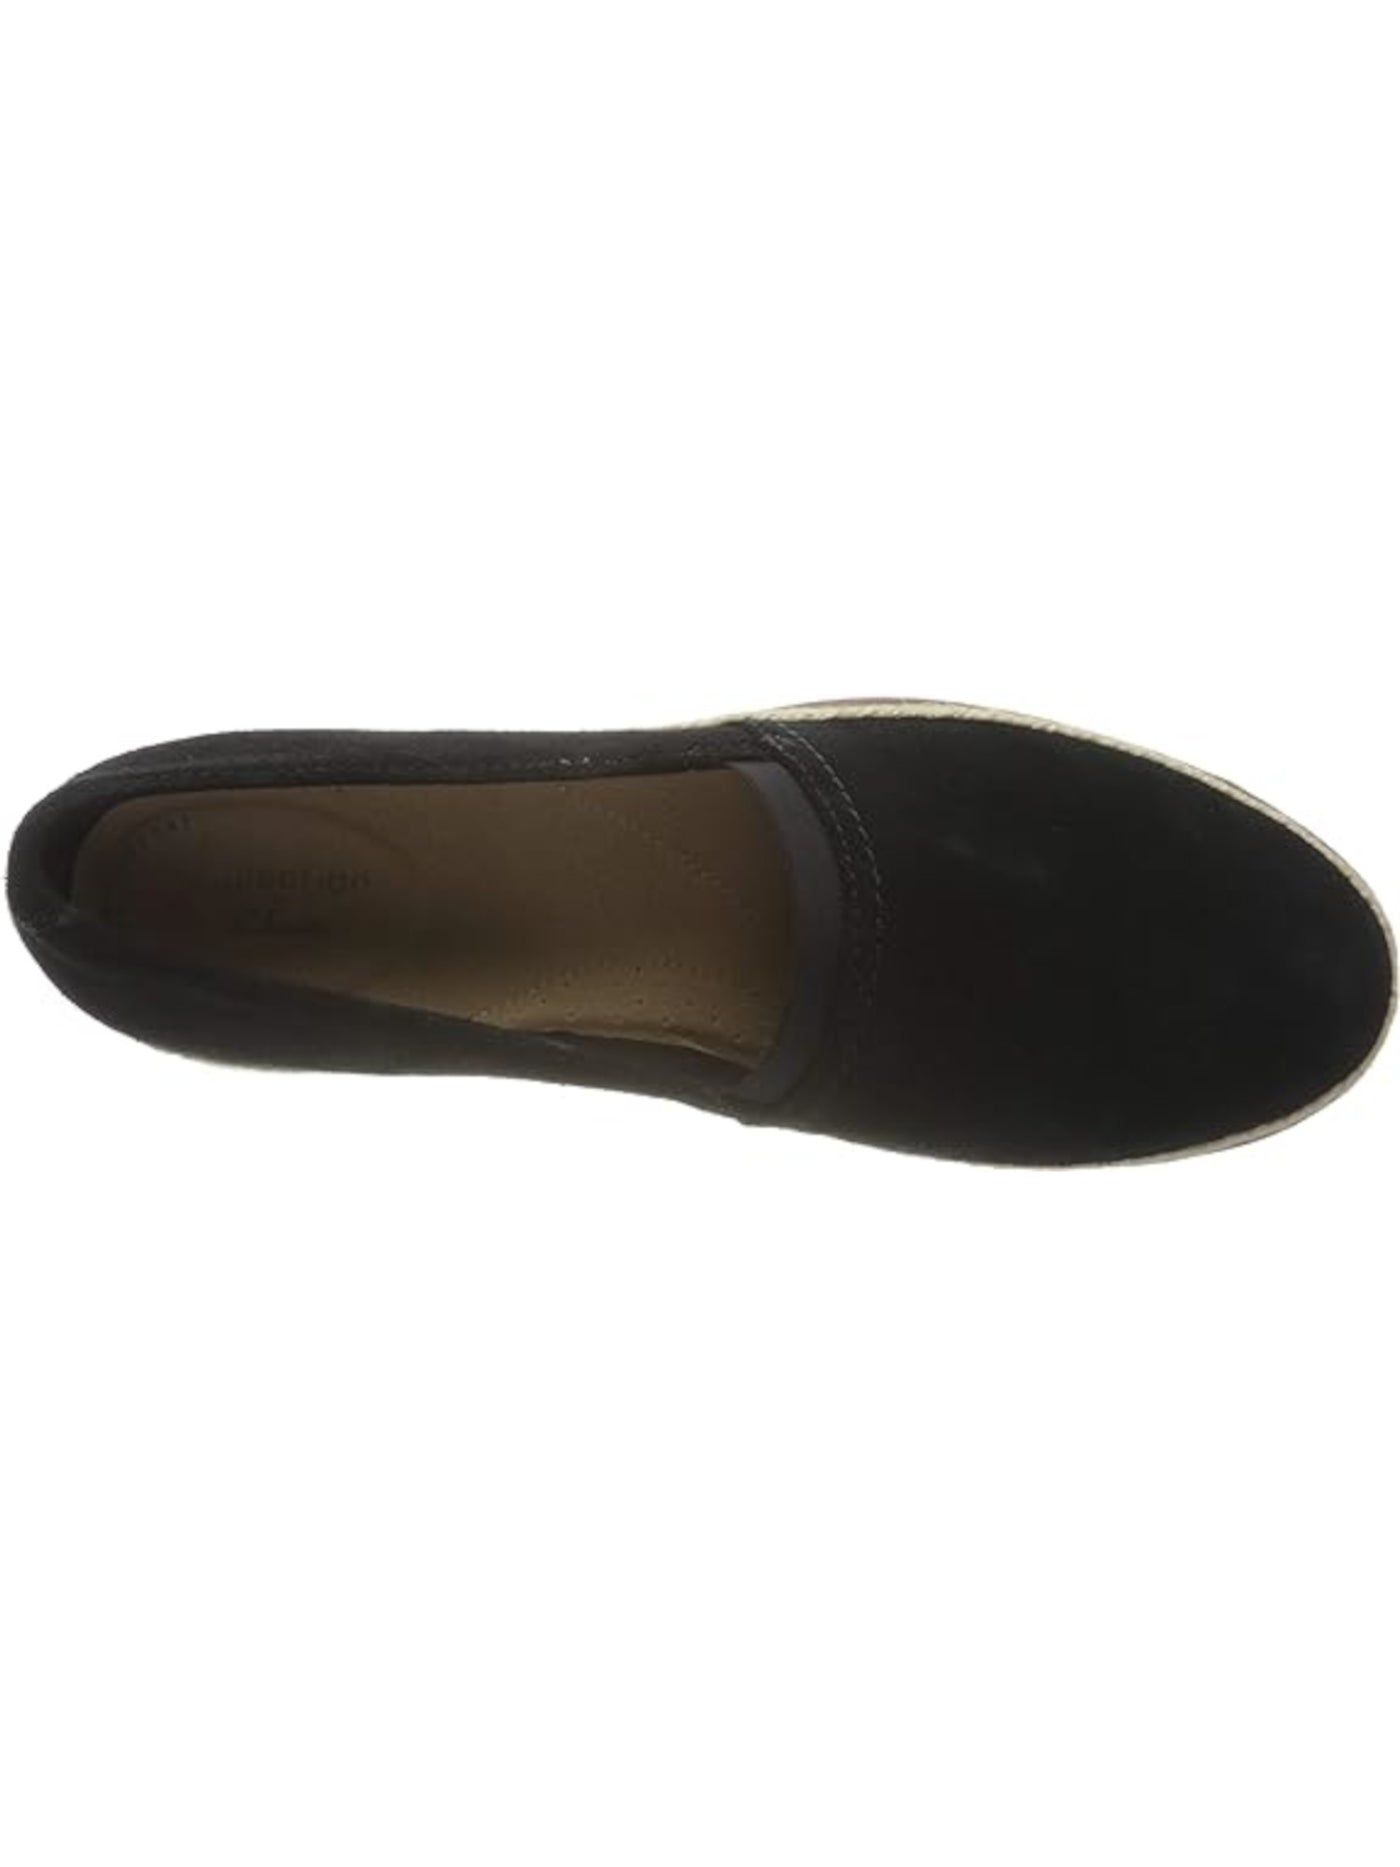 COLLECTION BY CLARKS Womens Black Cushioned Serena Paige Round Toe Platform Slip On Leather Flats Shoes 7.5 M